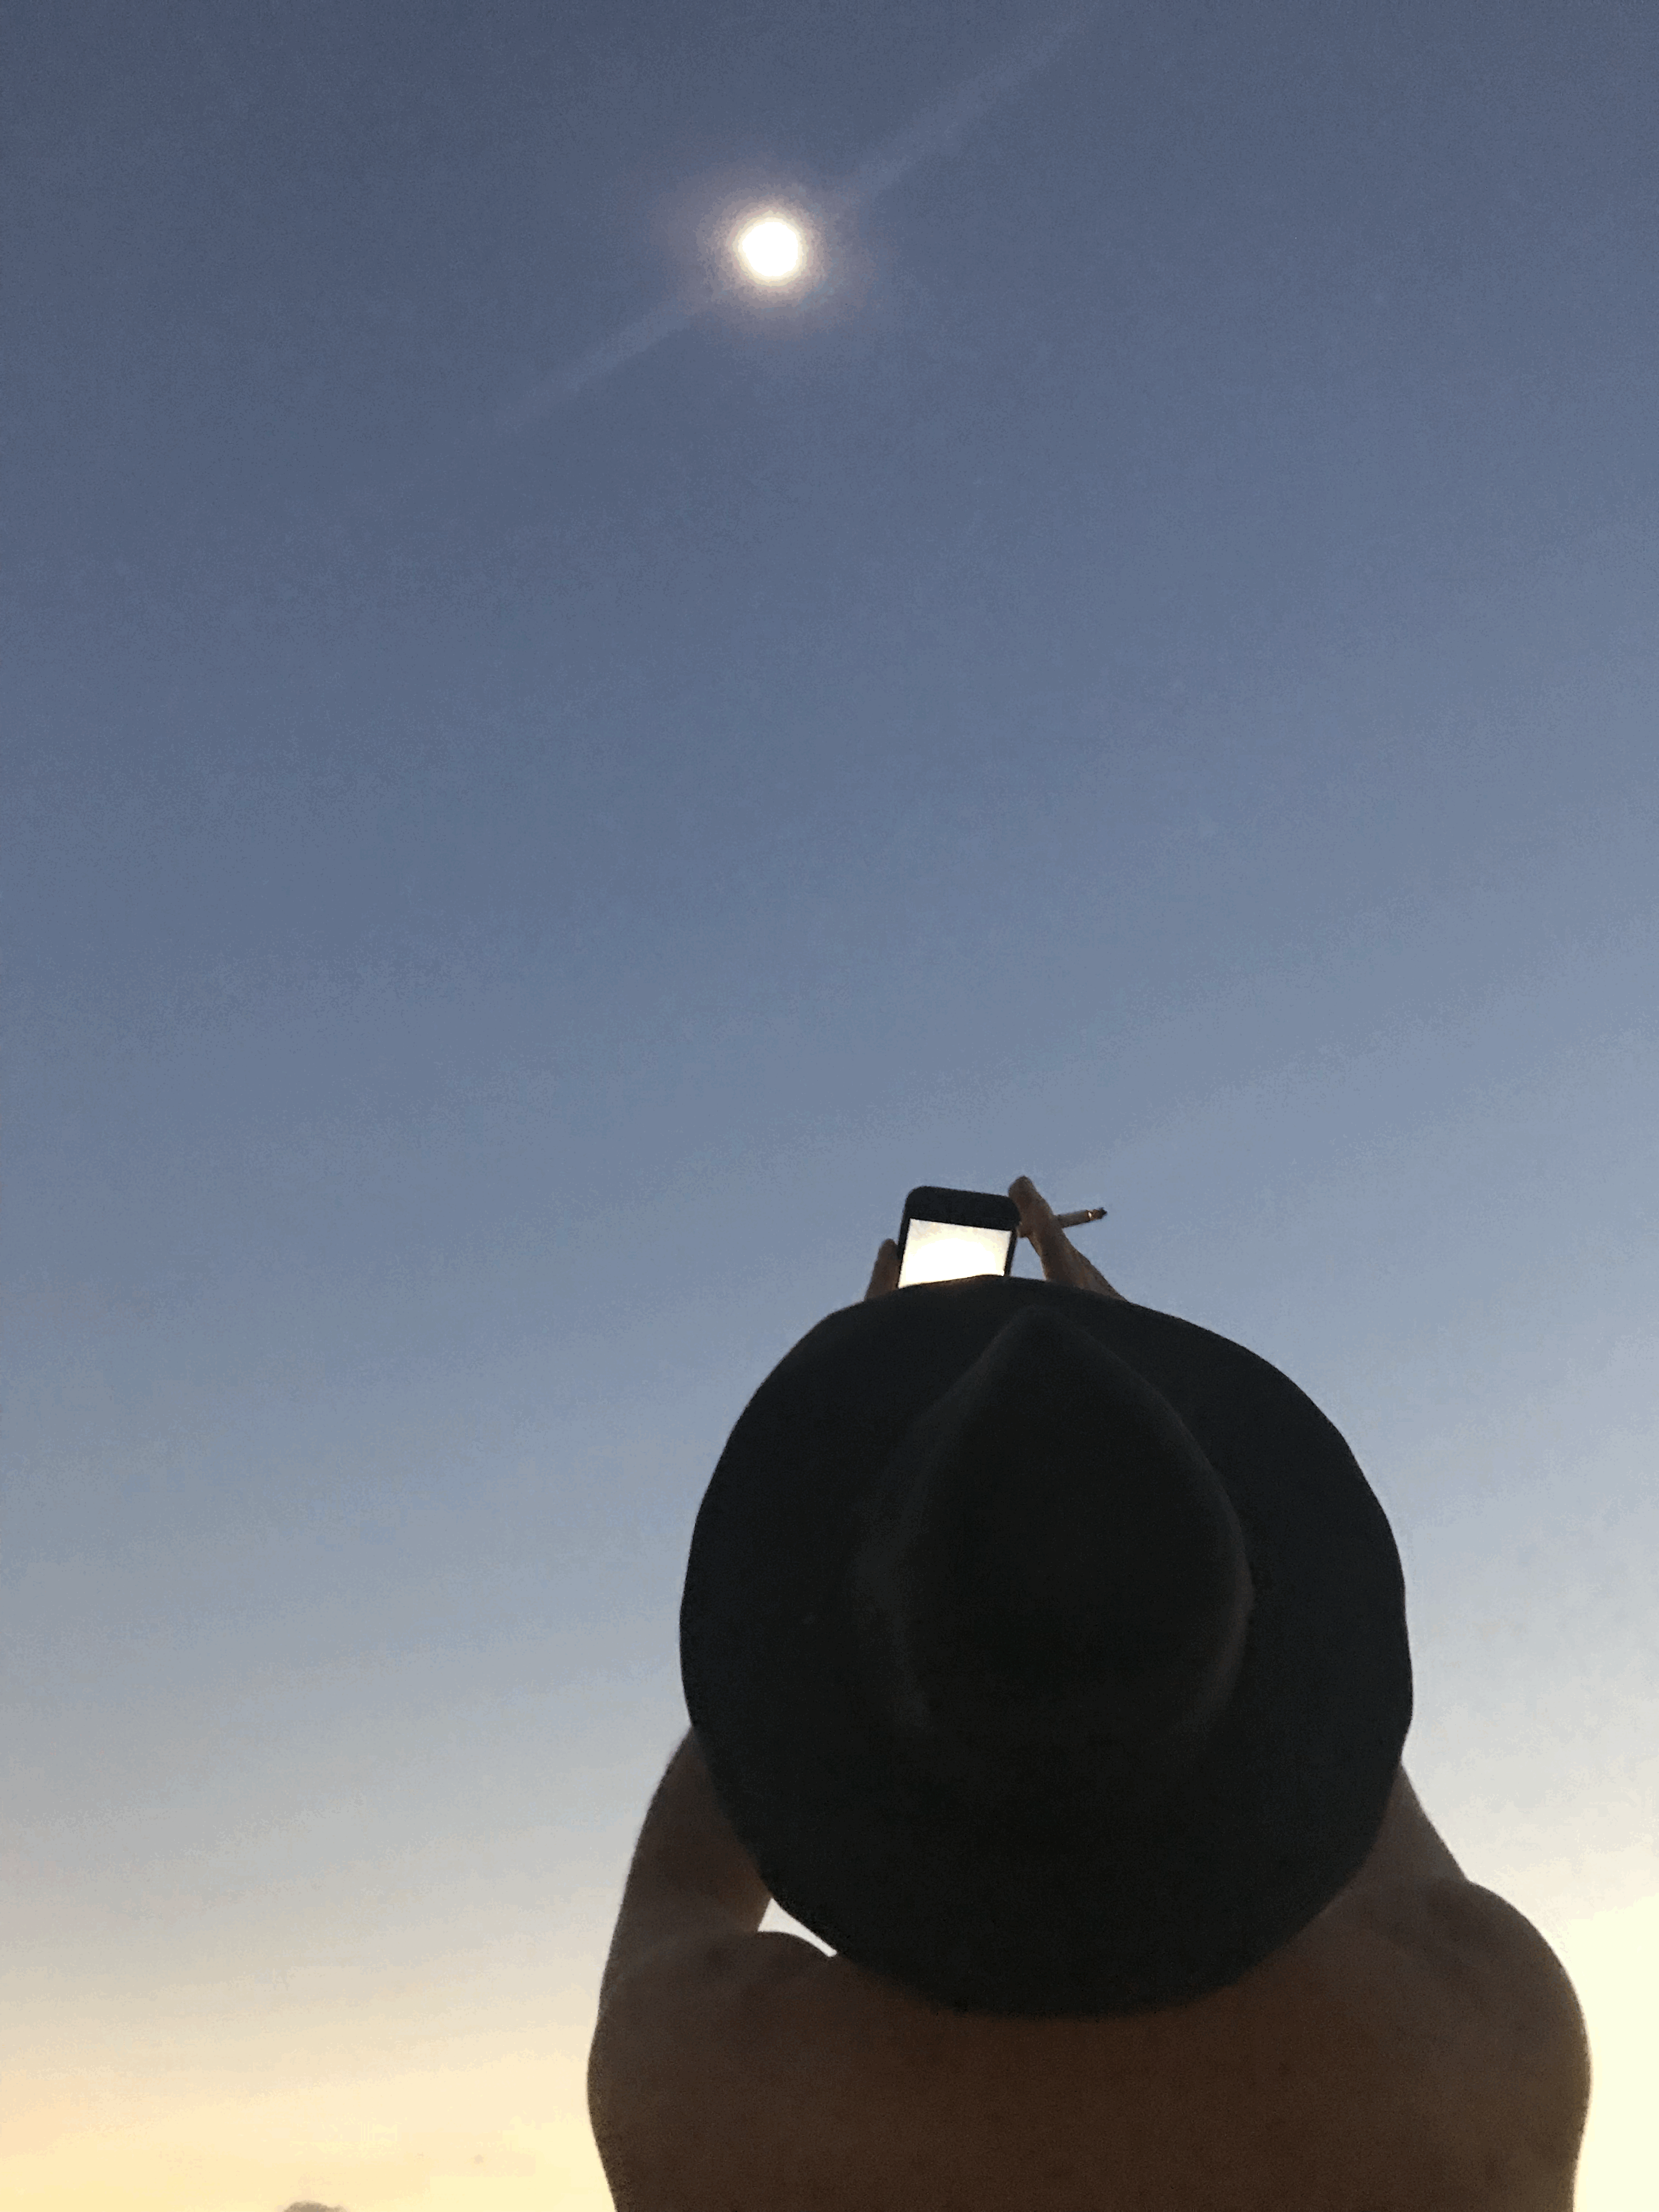 Let's chase an eclipse